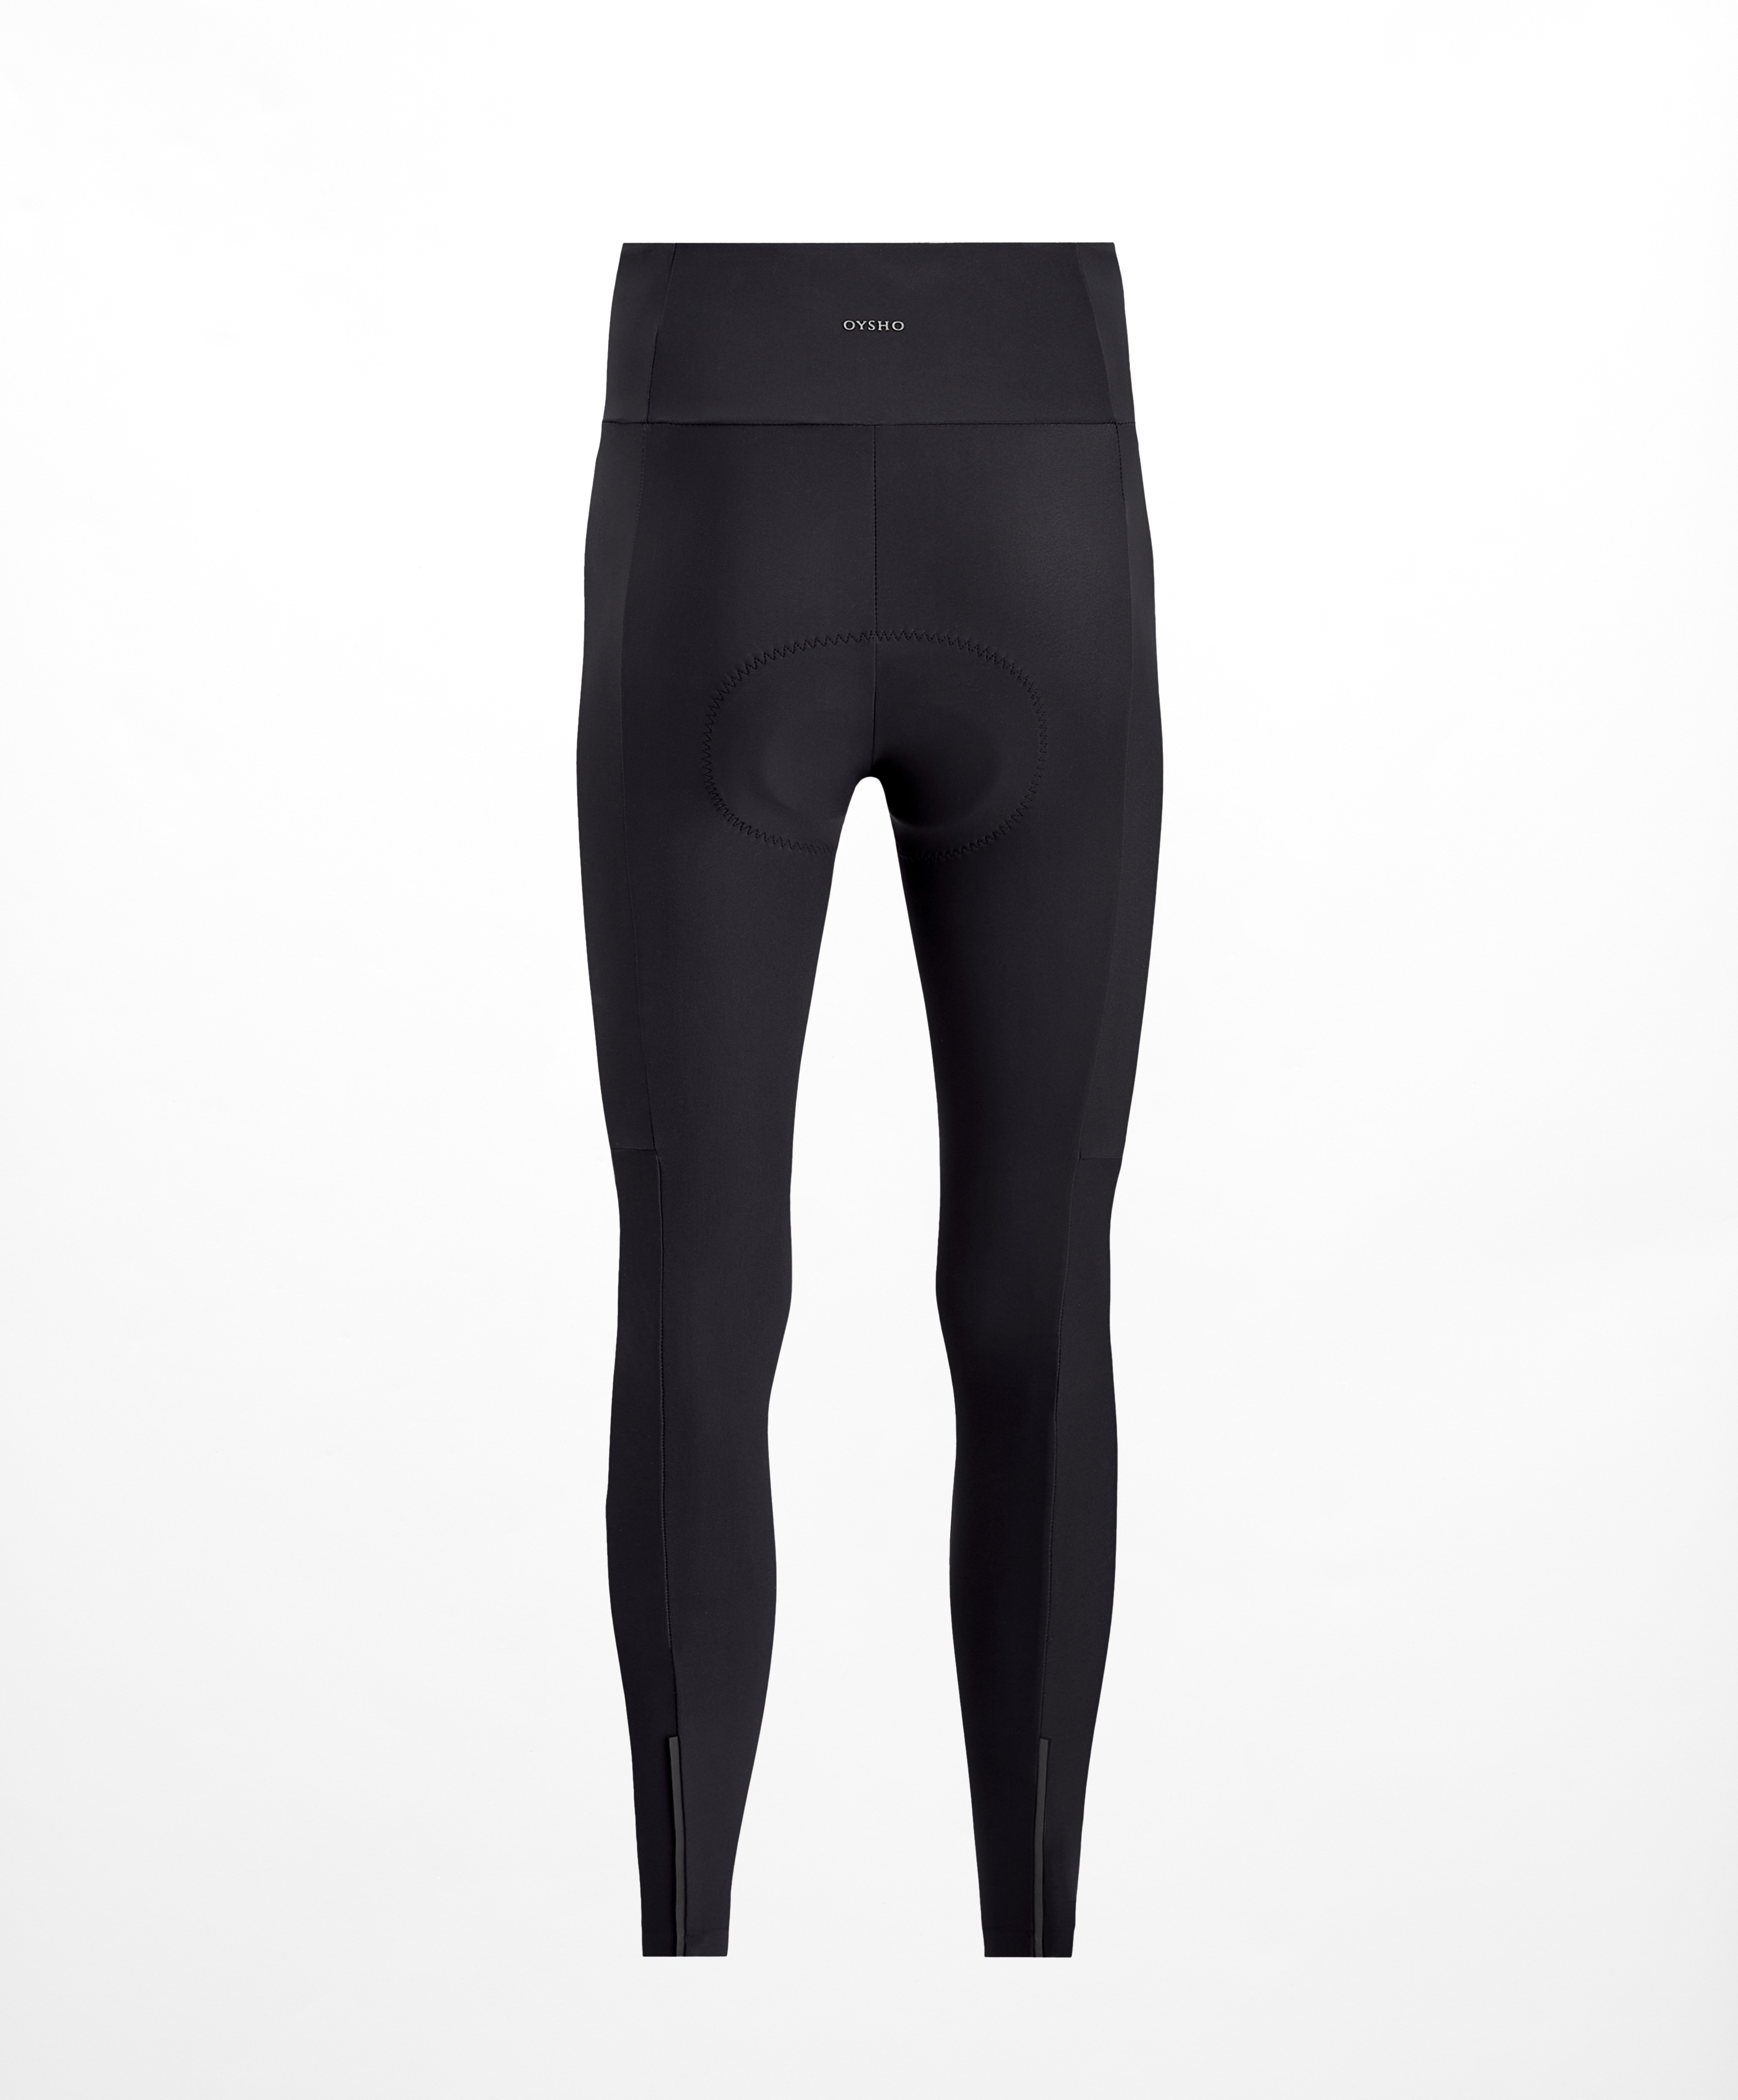 cycling leggings | United States